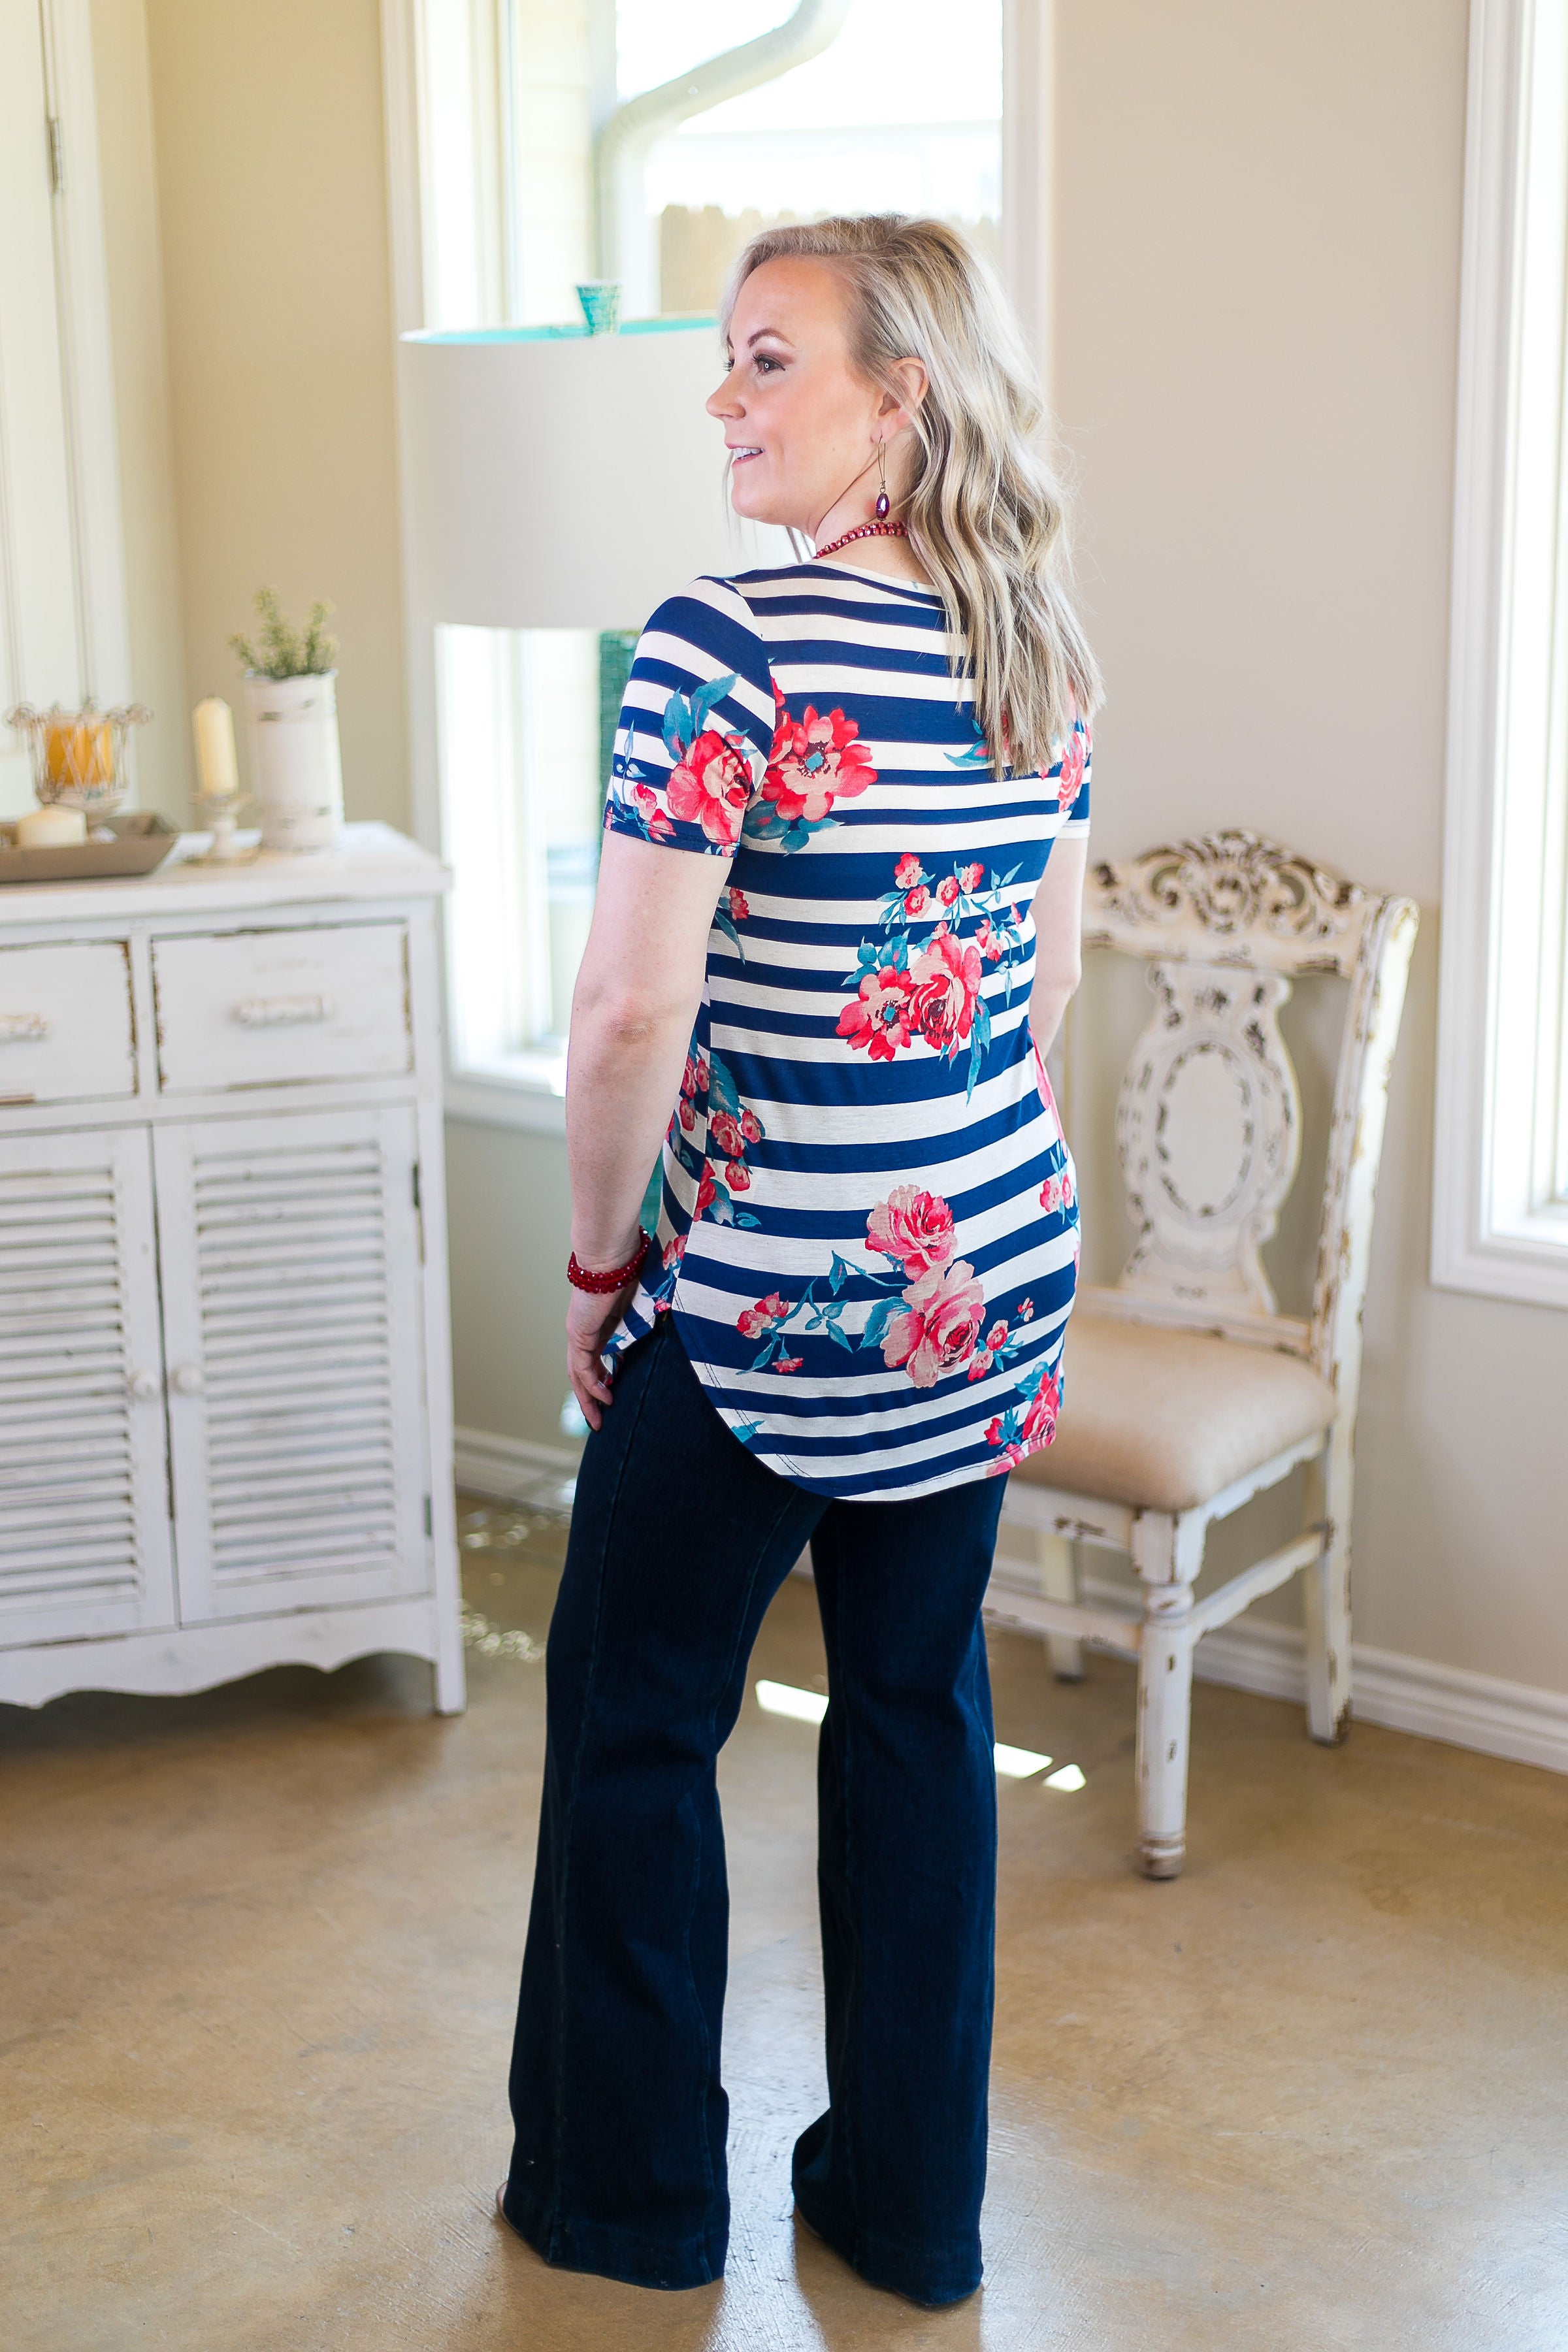 Last Chance Size Small | Simply The Best V Neck Stripe & Floral Short Sleeve Tee Shirt in Navy Blue - Giddy Up Glamour Boutique